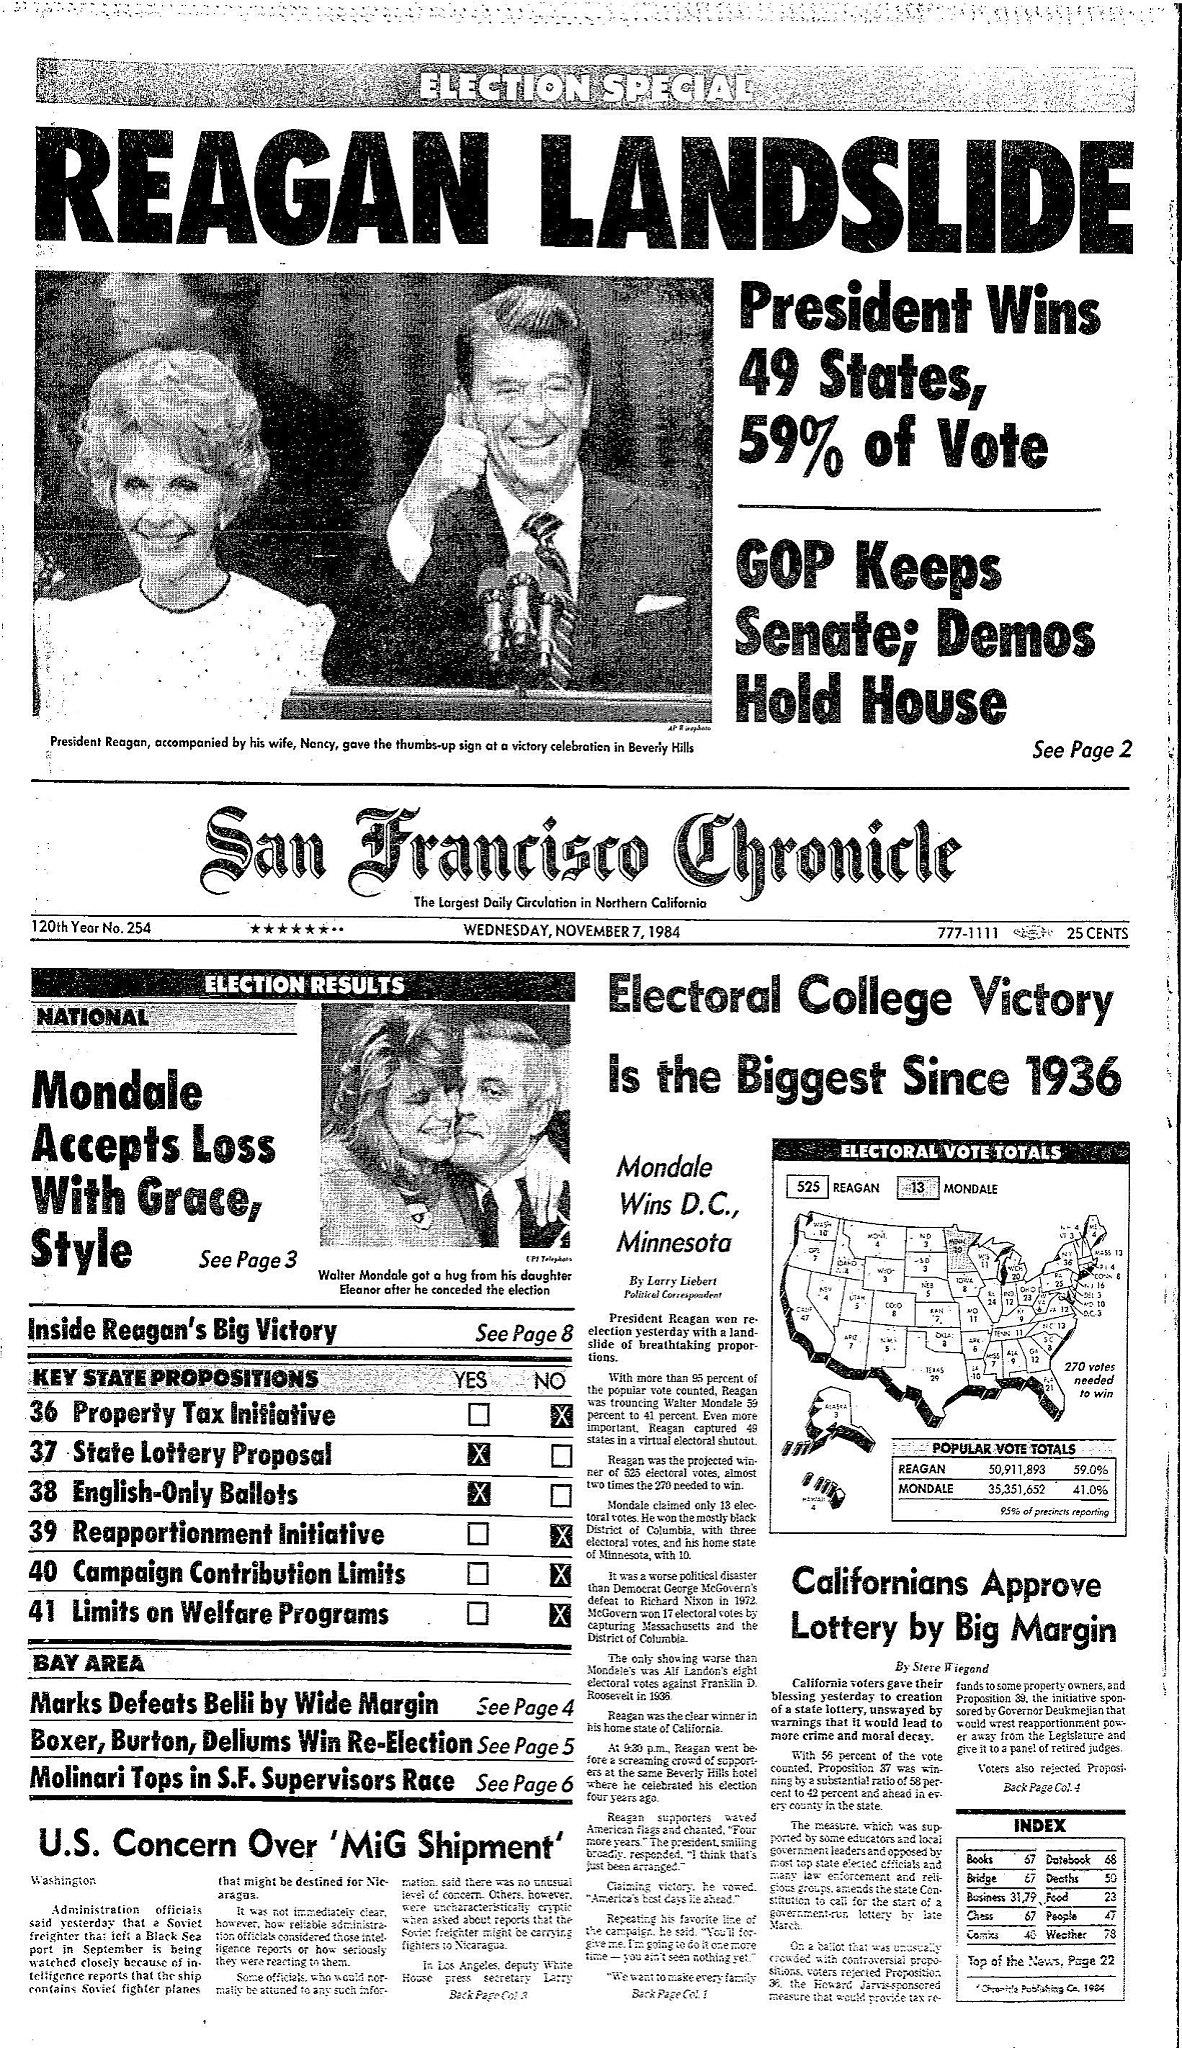 Chronicle Covers: Ronald Reagan’s resounding re-election victory - SFChronicle.com